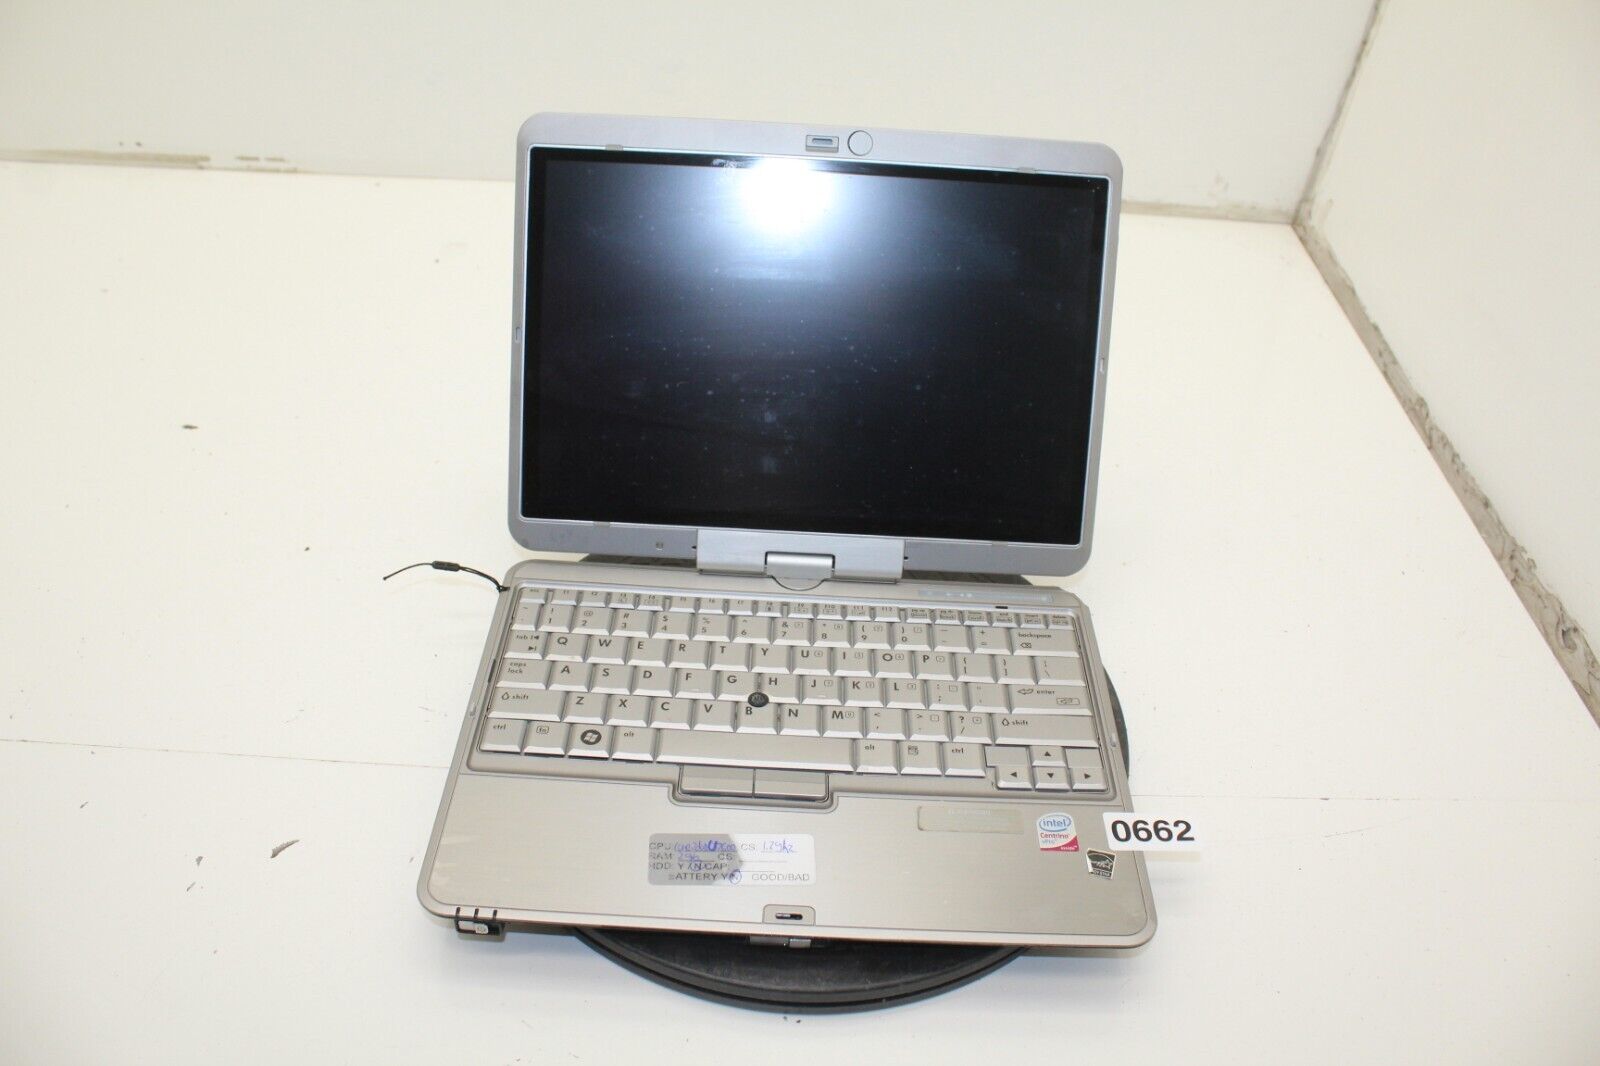 HP Compaq 2710p Laptop Intel Core 2 Duo 2GB Ram No HDD or Battery